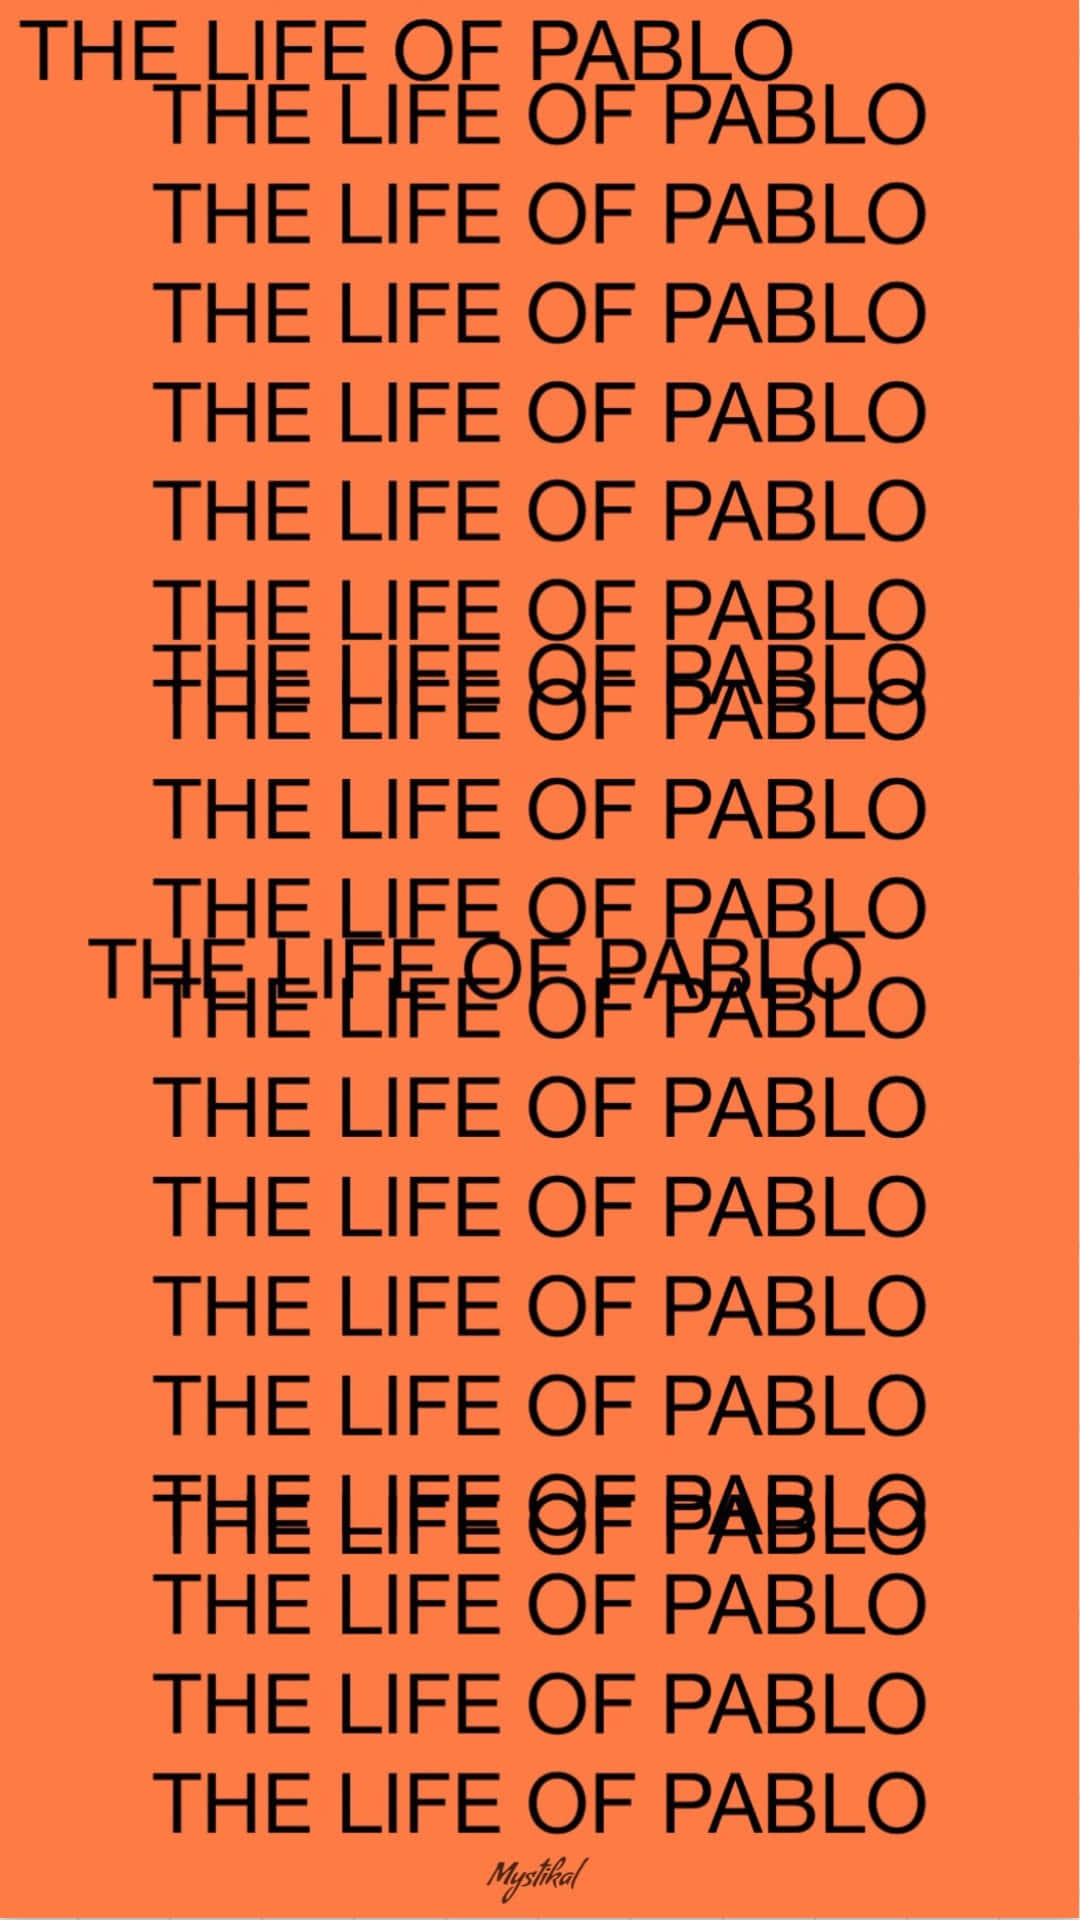 The life of pablo. The Life of Pablo обложка. The Life of Pablo Cover. The Life of Pablo Wallpaper iphone. Kanye West the Life of Pablo обложка.